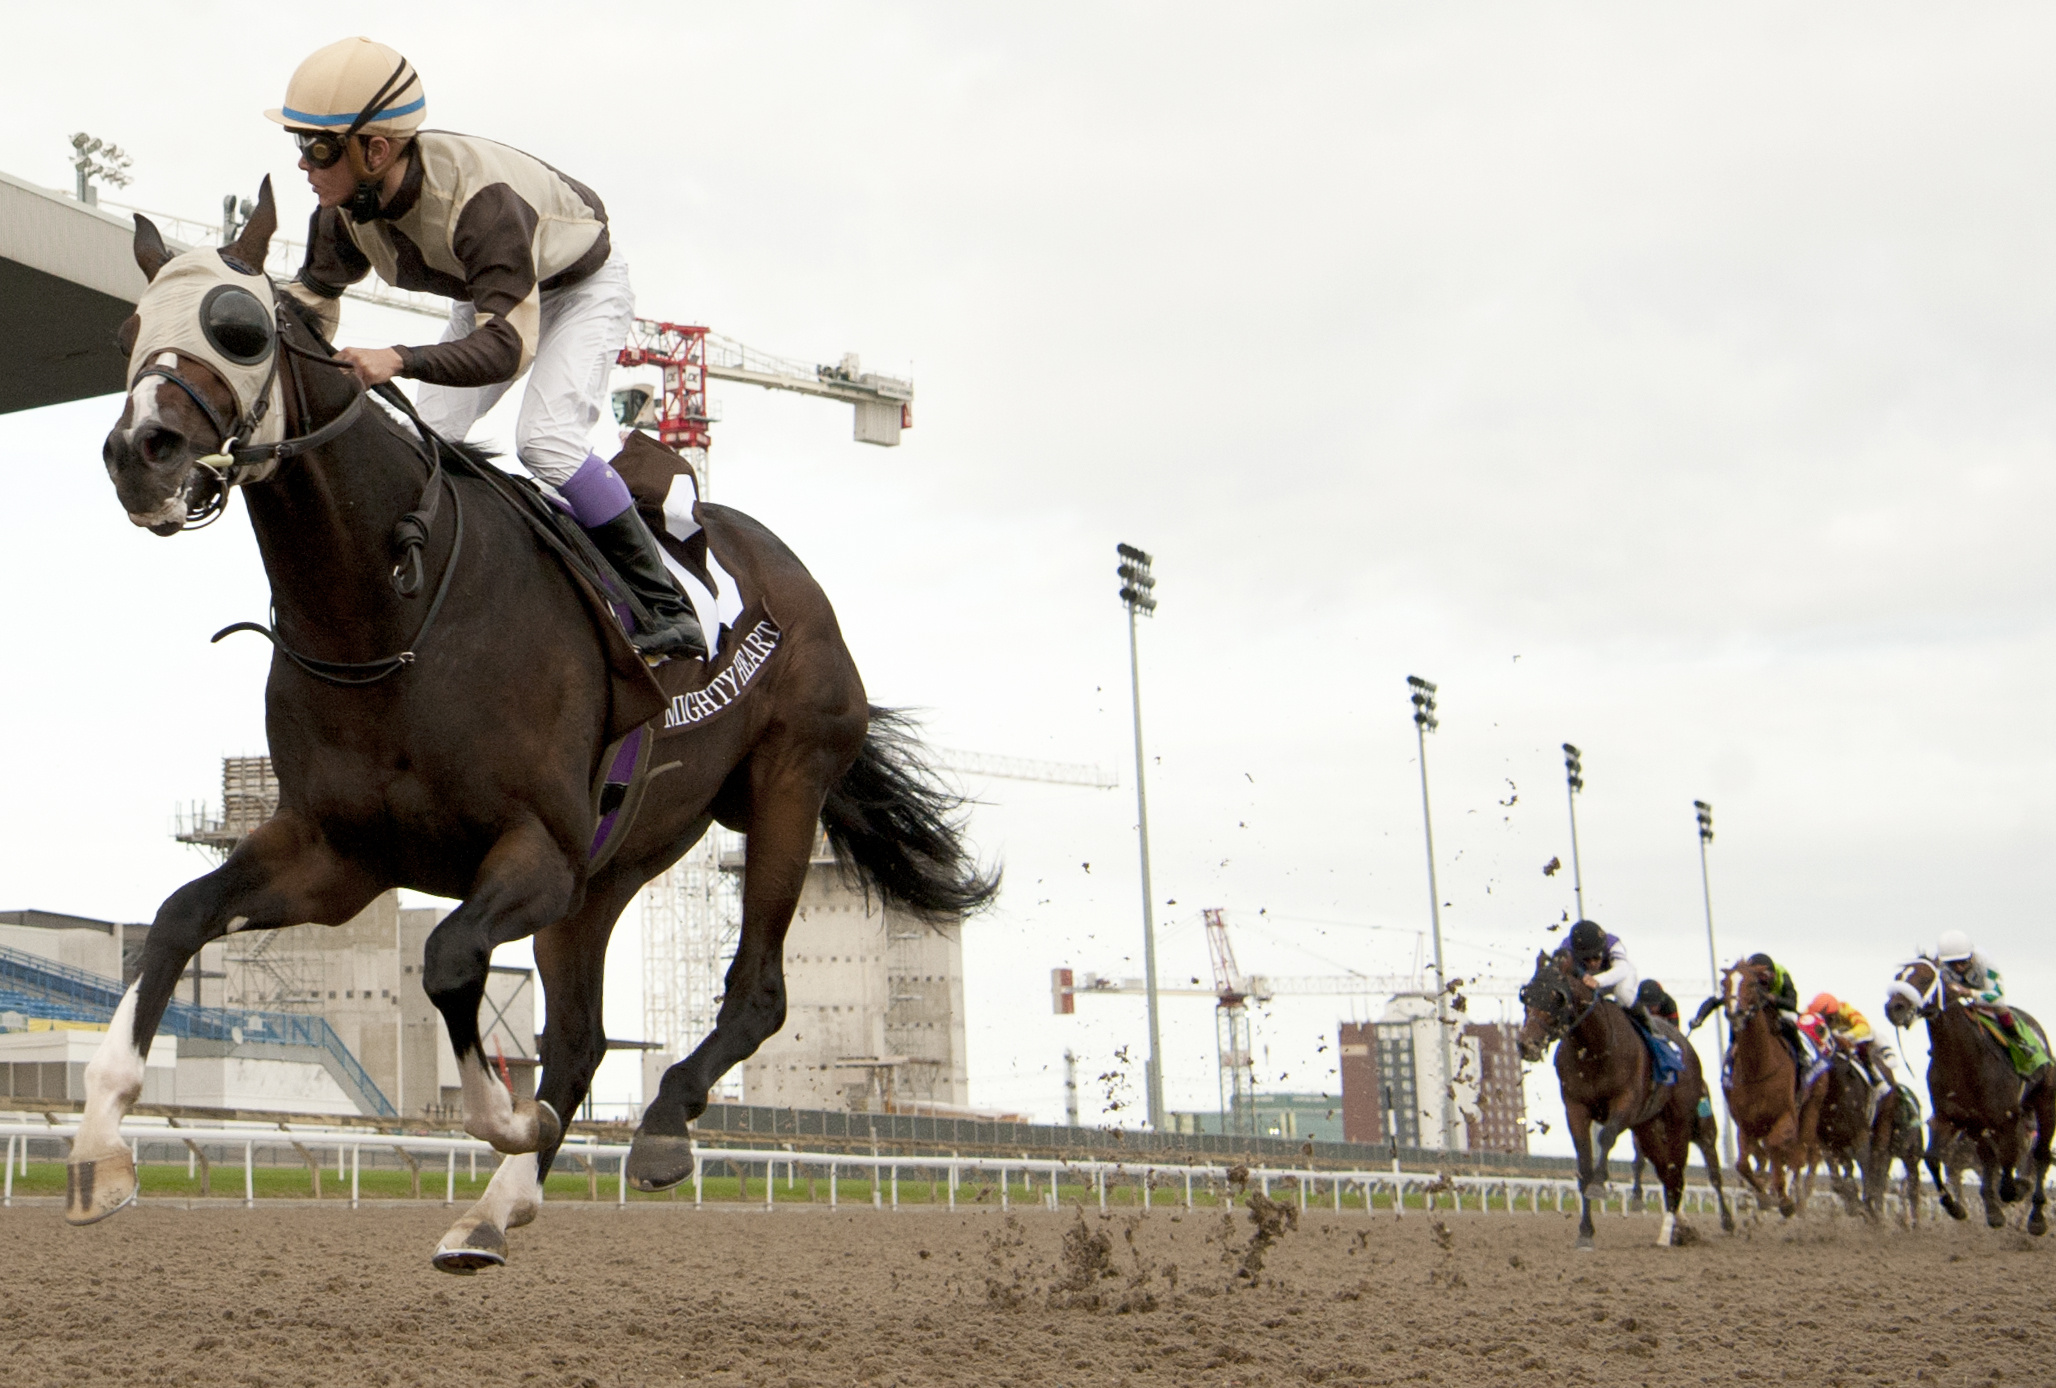 Horse Racing, Exciting races, Equine champions, Horse racing coverage, 2060x1390 HD Desktop